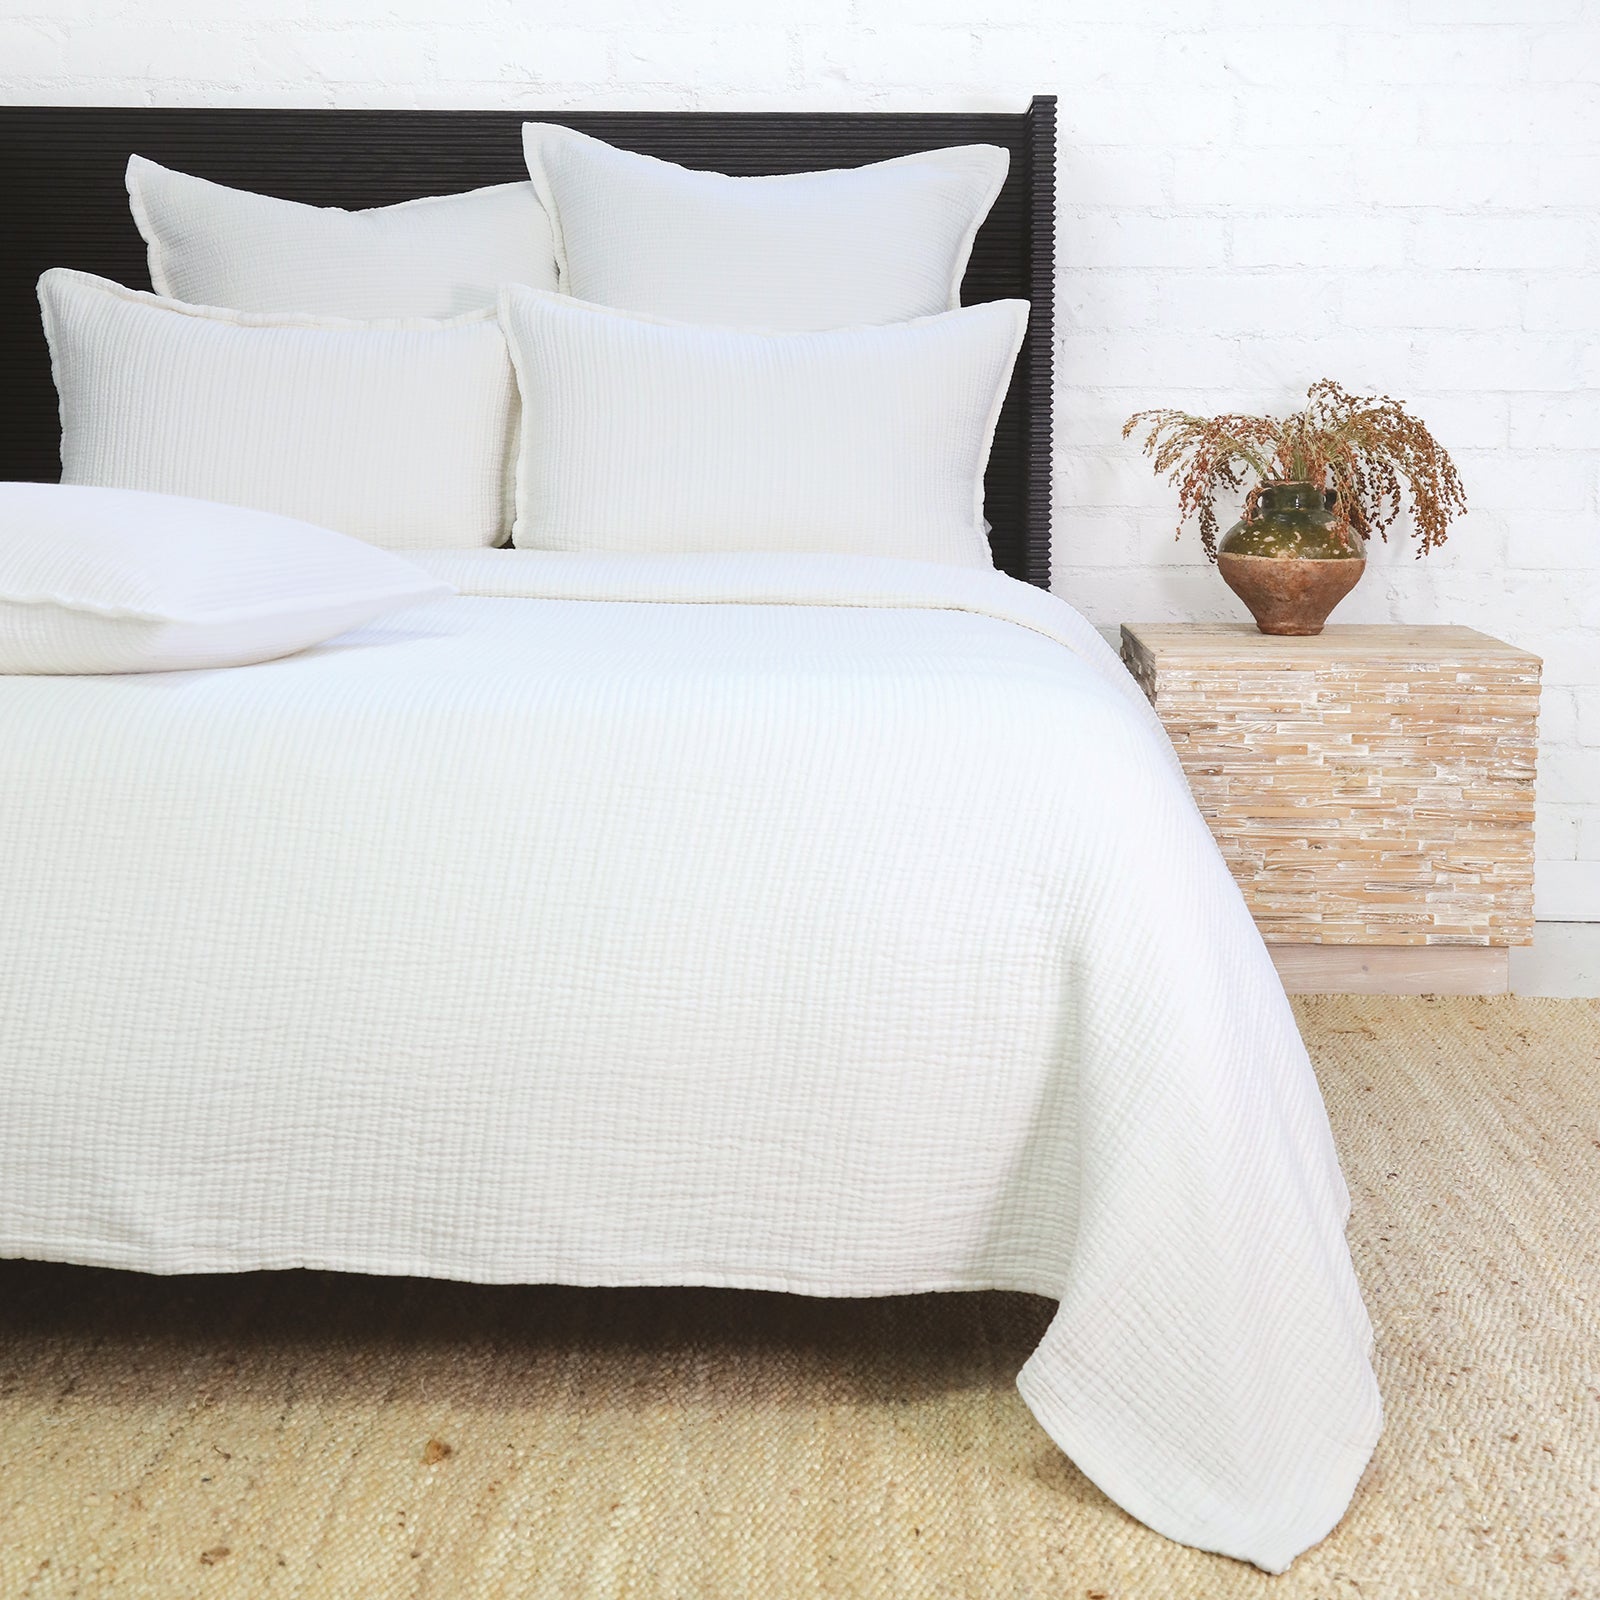 chatham matelasse collection - cream color - coverlet - pom pom at home